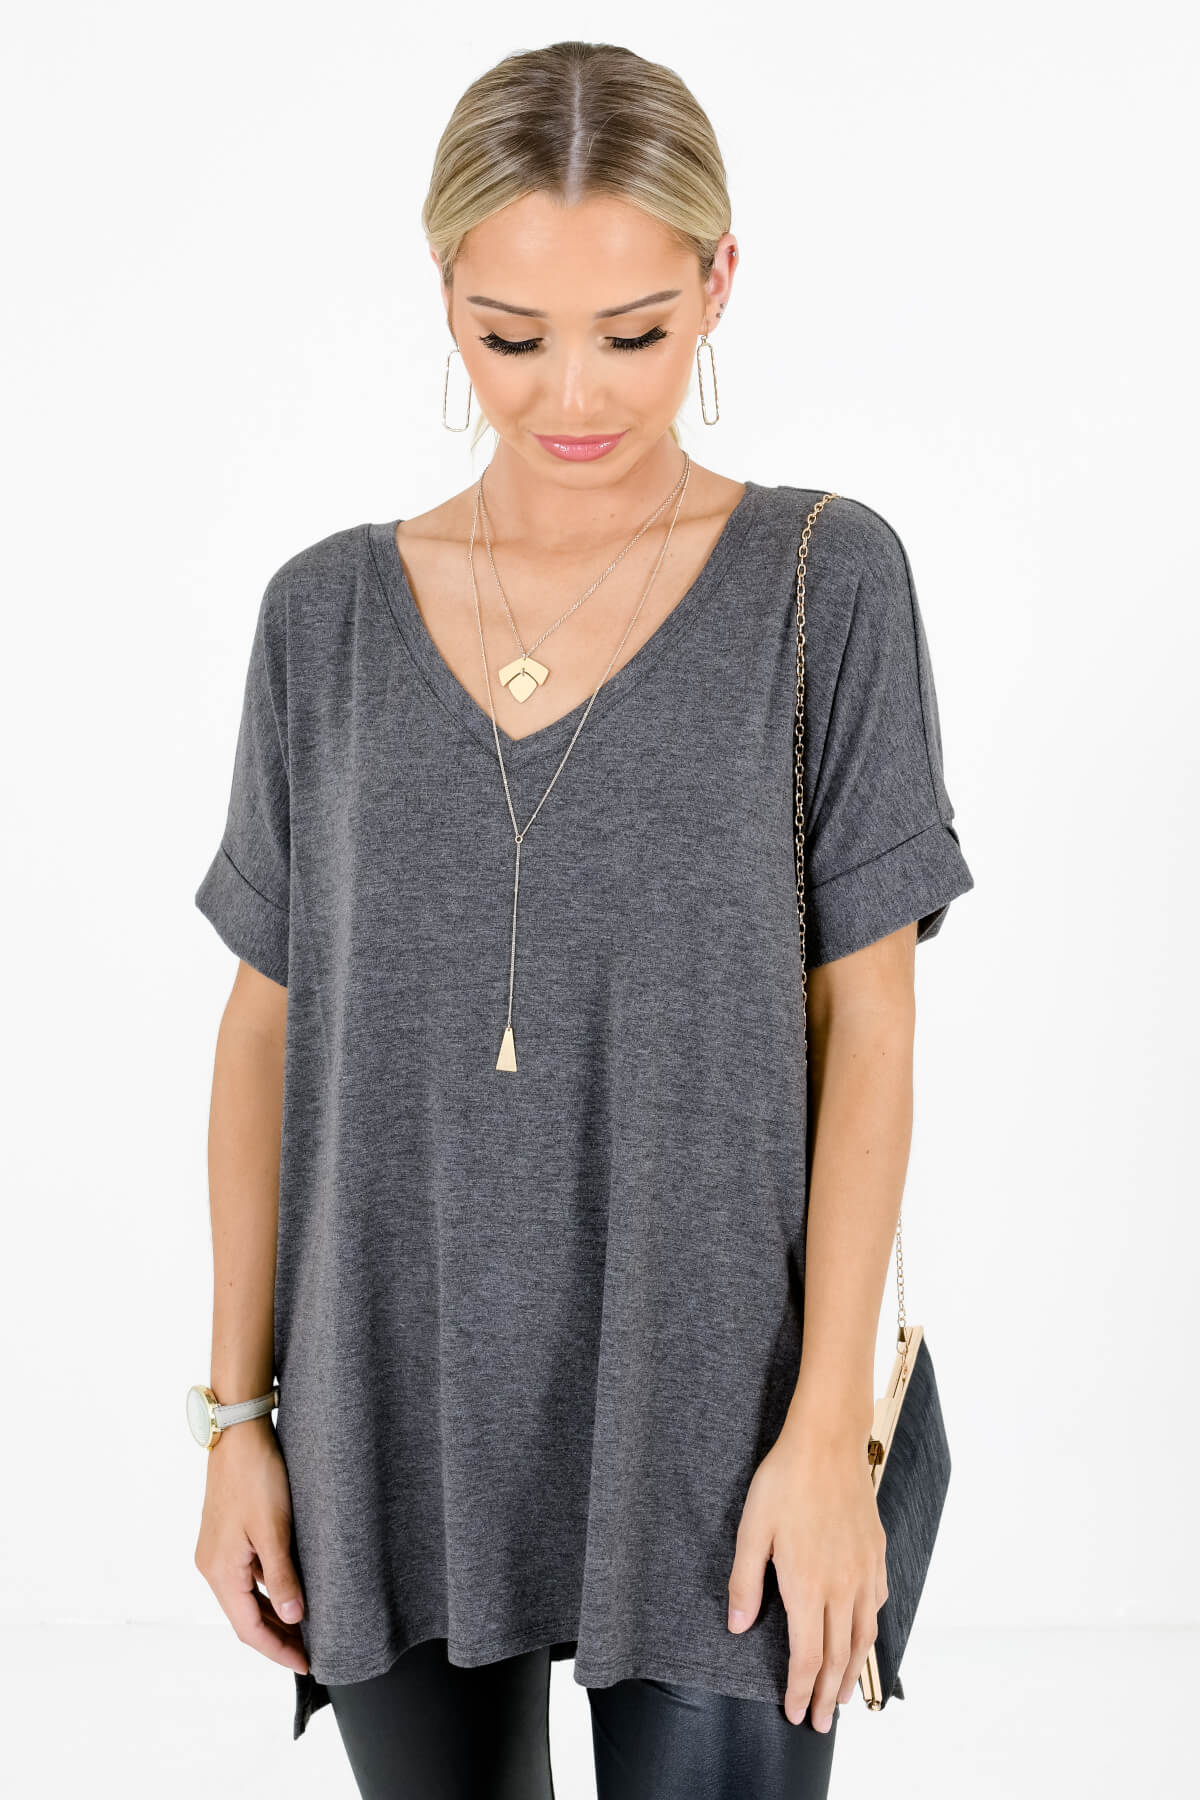 Charcoal Gray V-Neckline Boutique Tops for Women